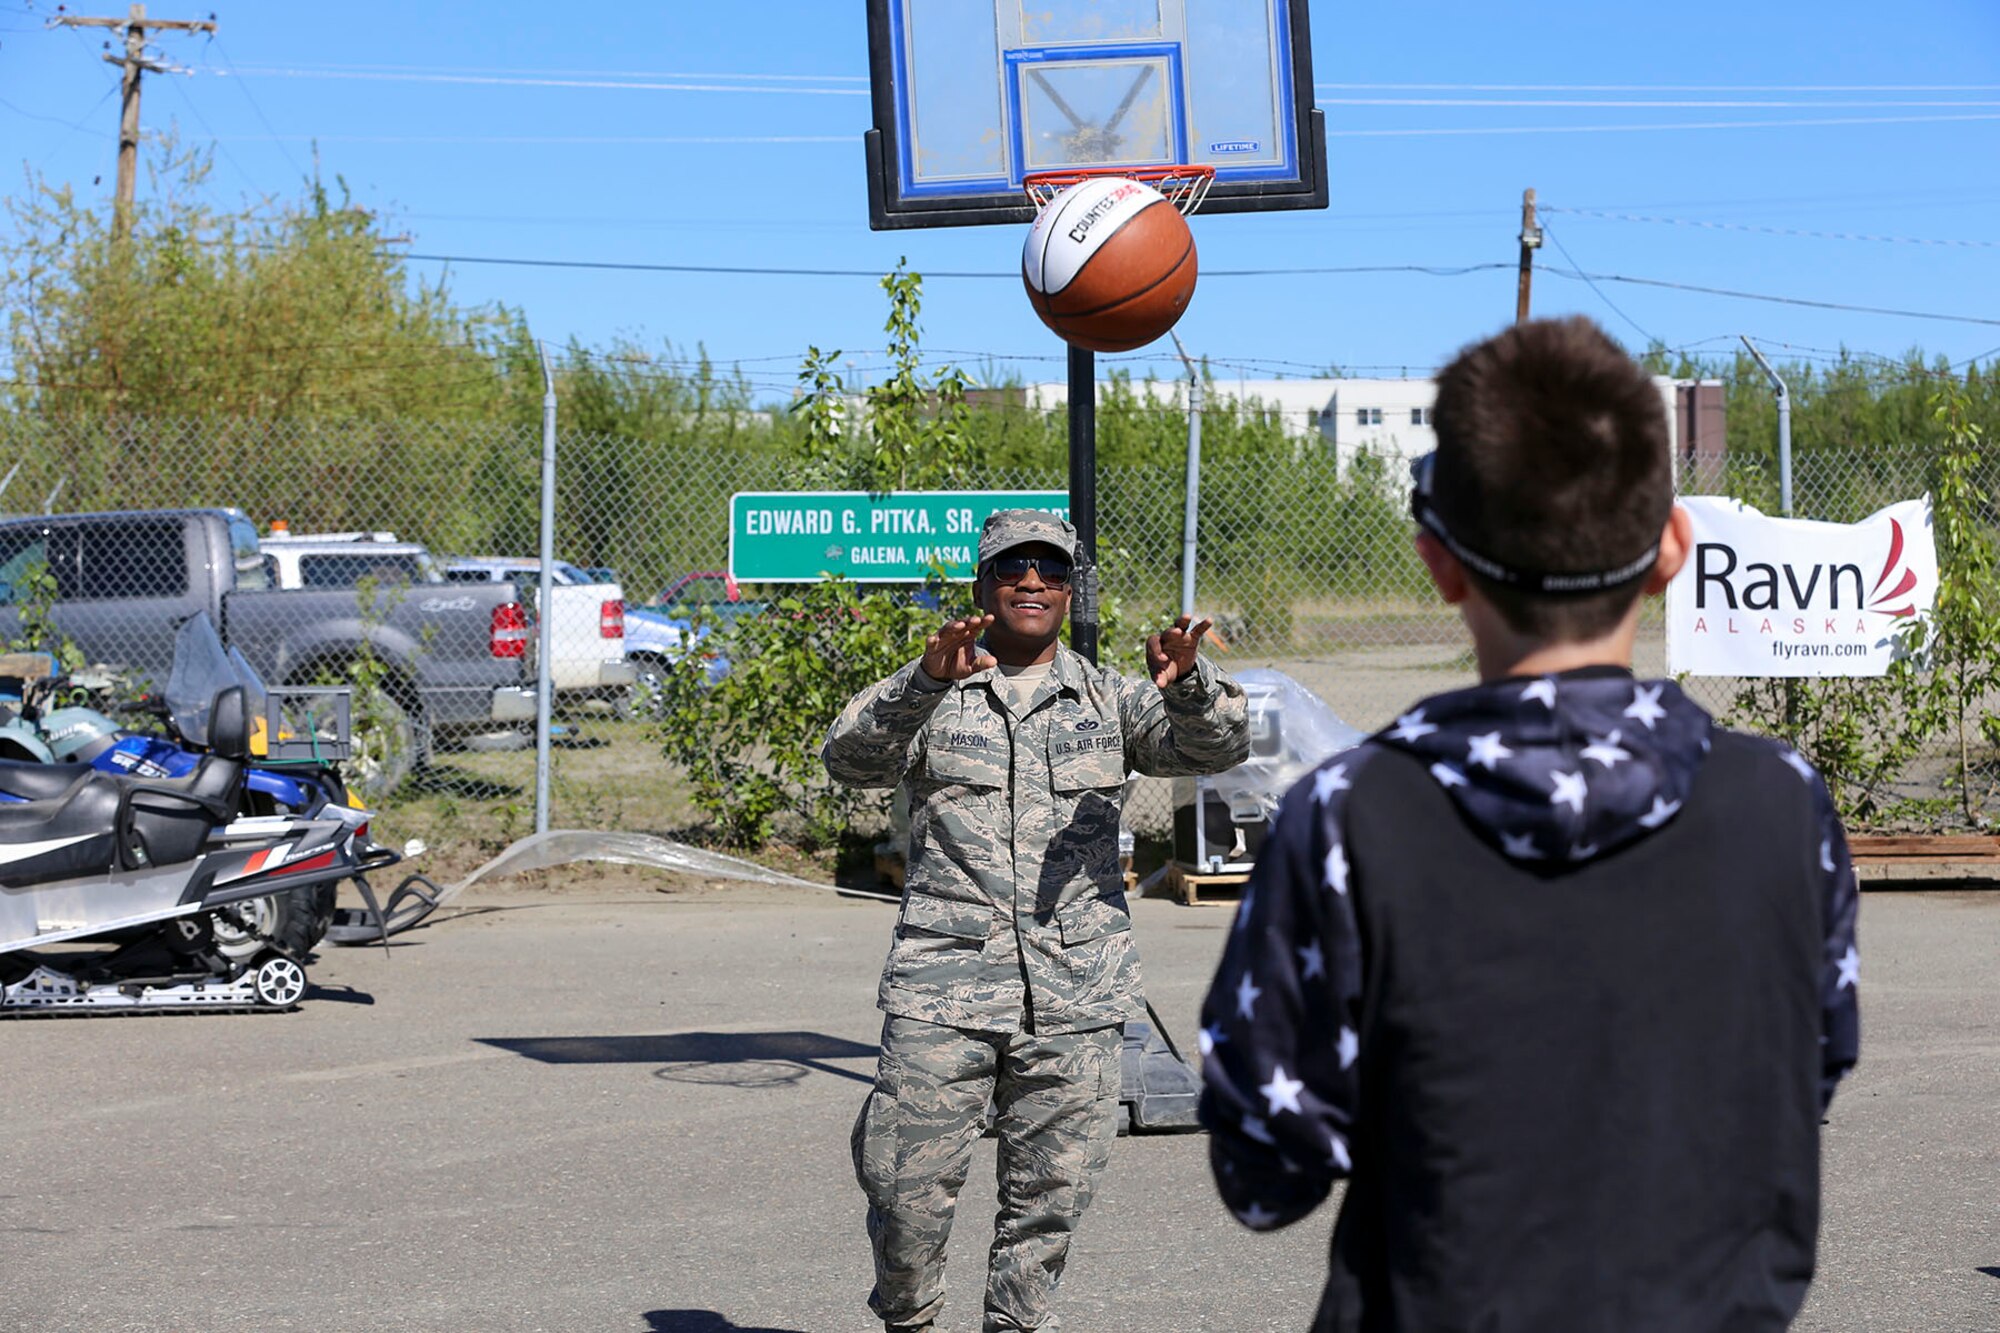 Alaska National Guard Staff Sgt. Dneko Mason, with the Counter Drug Support Program, passes a basketball to a young boy wearing vision impairment goggles, a prevention tool used to demonstrate alcohol or drug impairment, at the Edward G. Pitka Sr. Airport in Galena, Alaska, May 31, 2017. The CDSP presented the goggles, a tool used to demonstrate alcohol or drug impairment, and provided drug and alcohol education and prevention materials to local residents during a recent civil operations mission in the Yukon-Koyukuk Region. (U.S. Army National Guard photo by Staff Sgt. Balinda O’Neal Dresel)